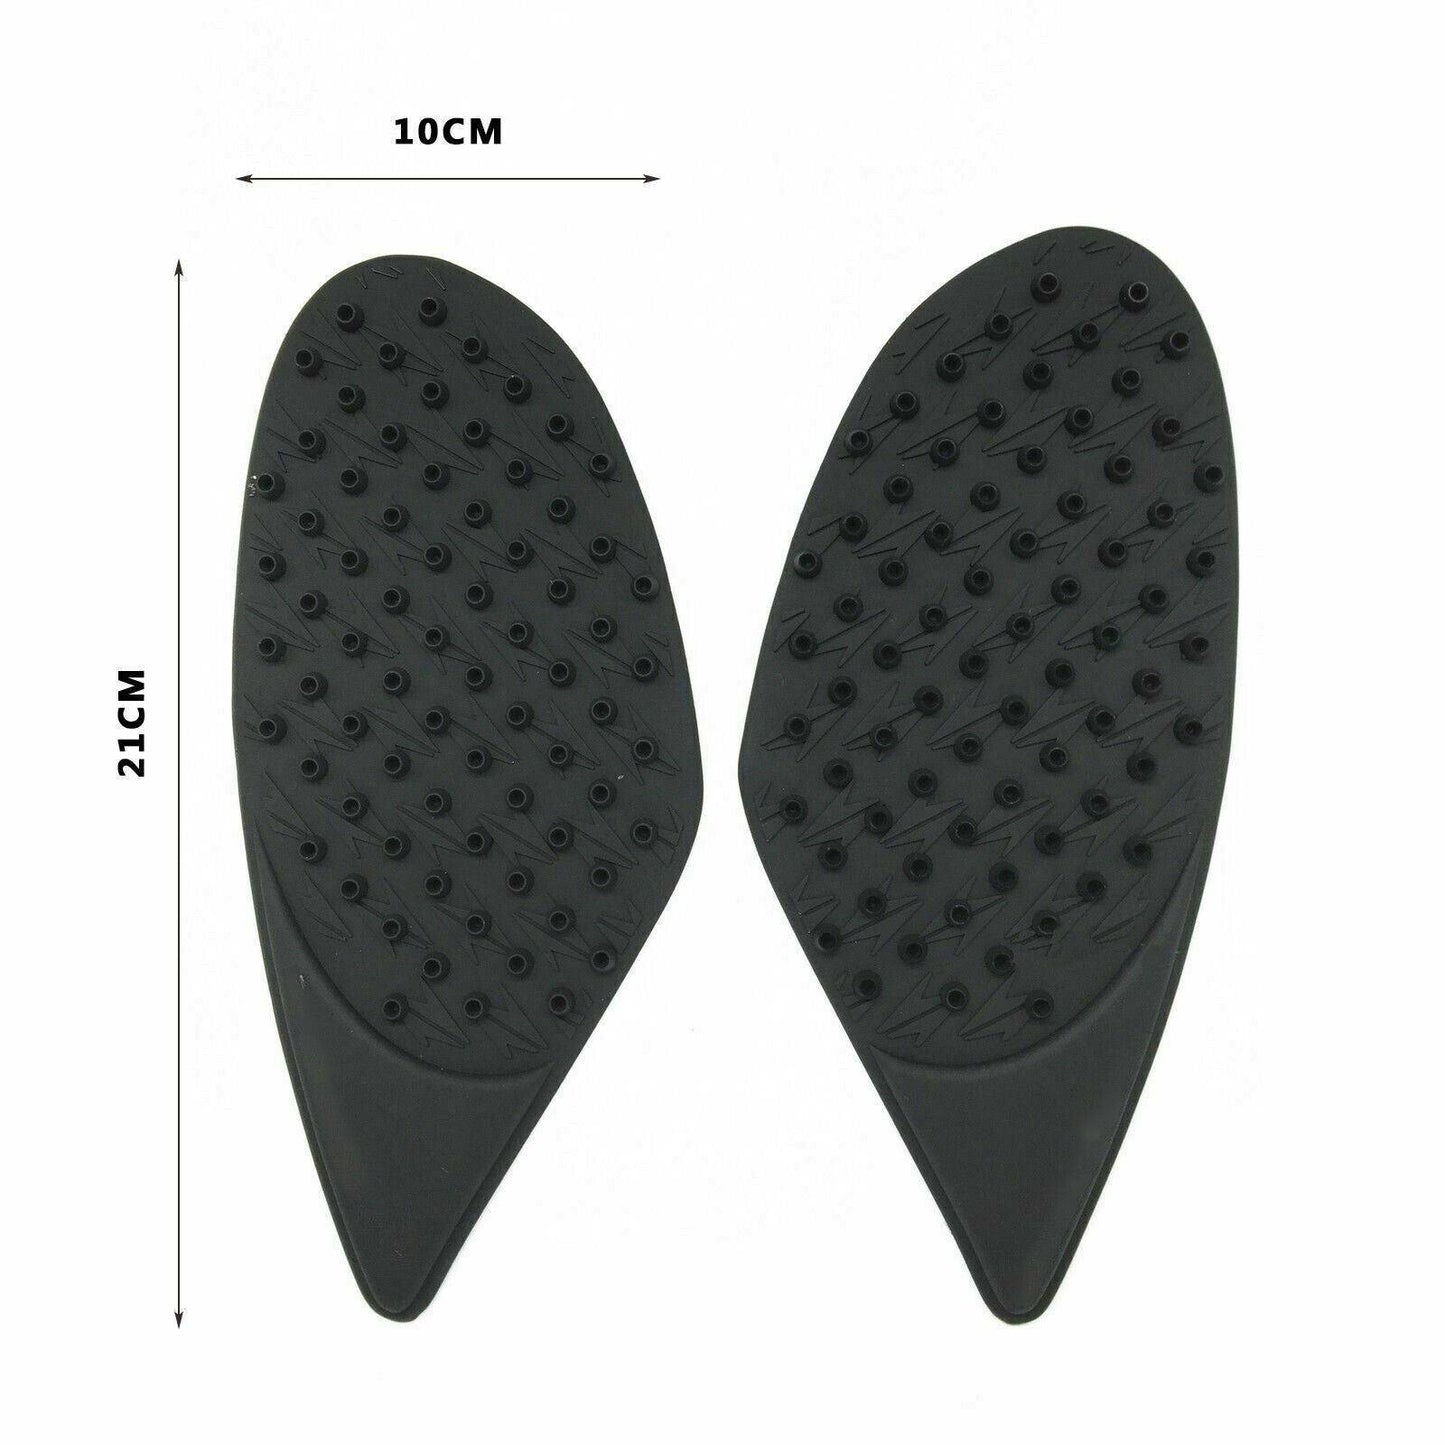 3M Rubber Tank Traction Pad Side Gas Knee Grip Protector Sticker CBR1000RR 2008-2015 - TDRMOTO